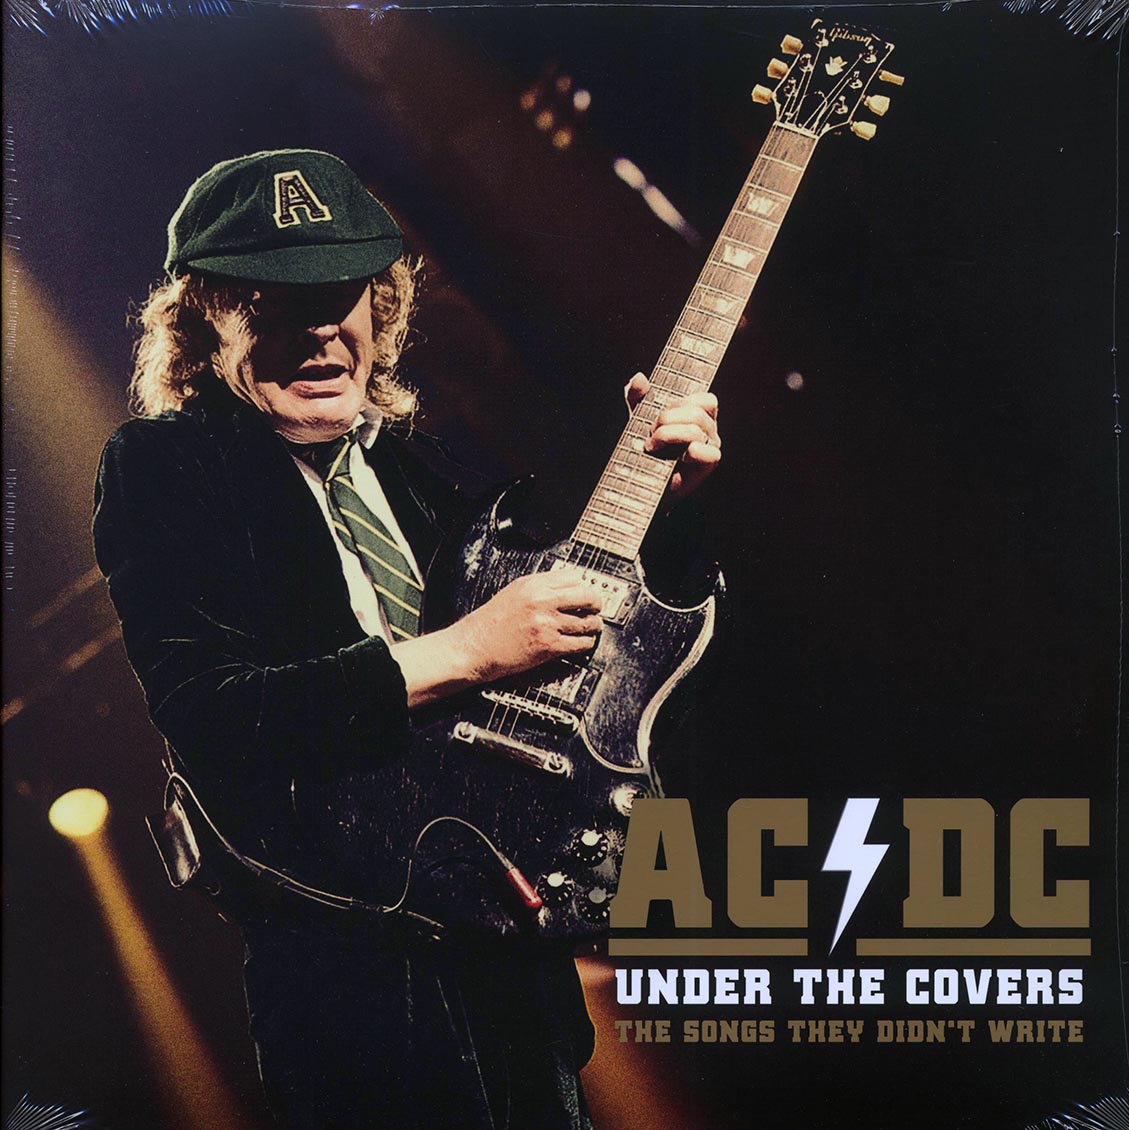 AC/DC - Under The Covers: The Songs They Didn't Write (2xLP) - Vinyl LP